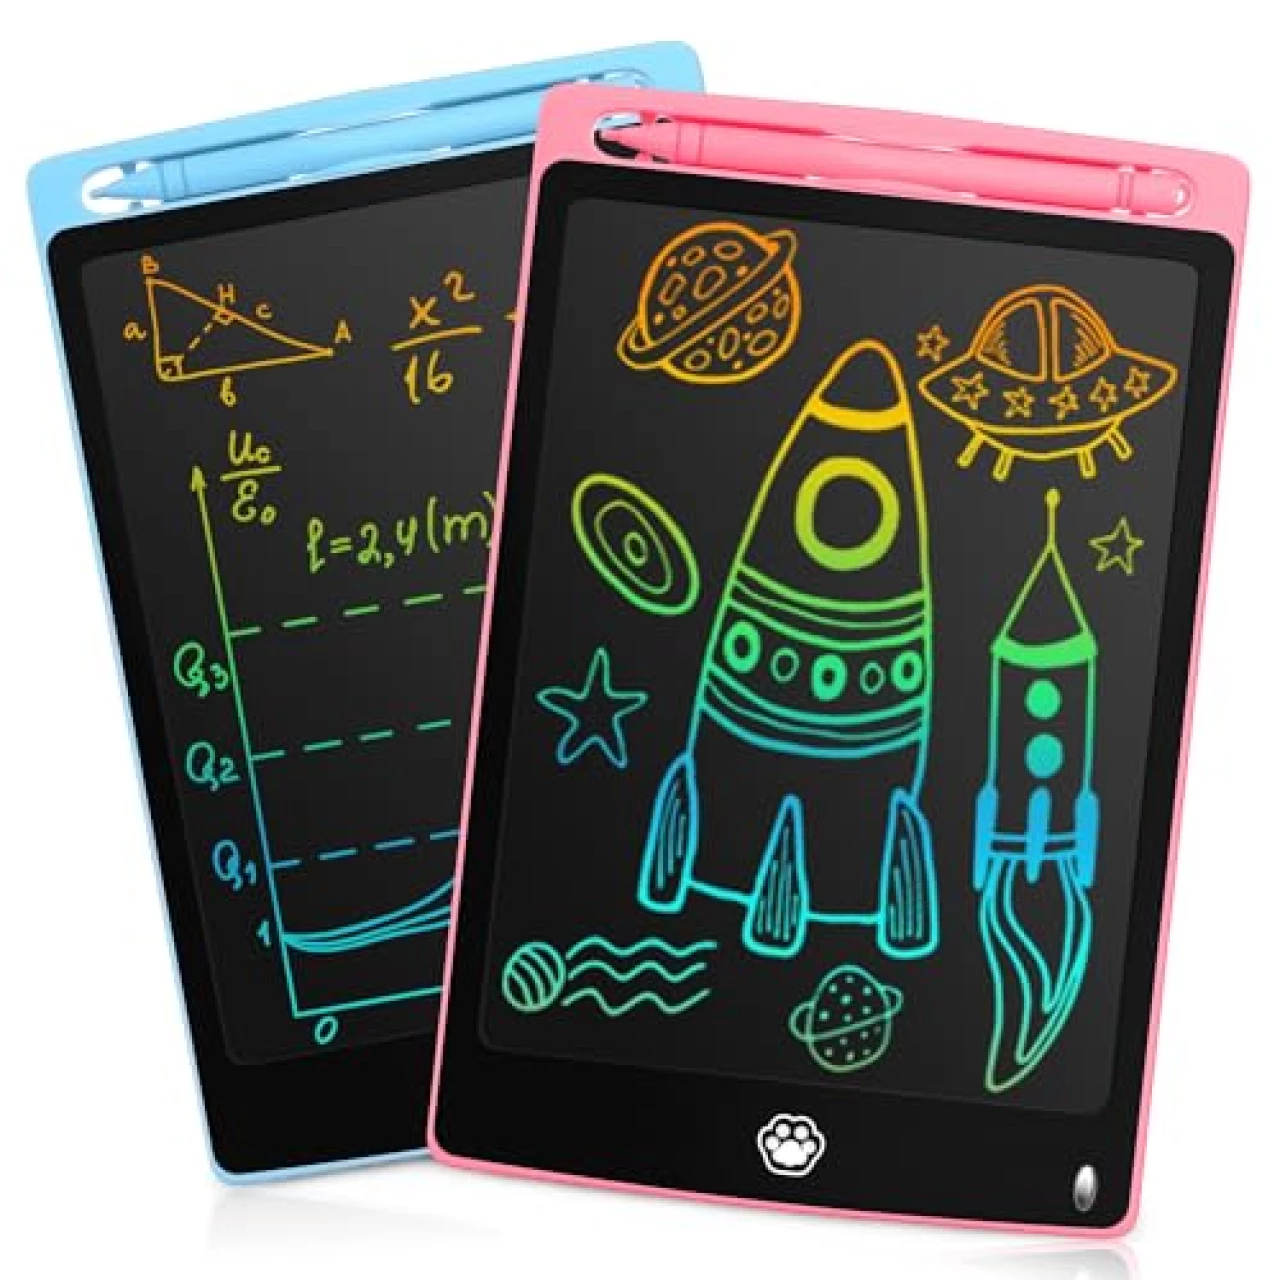 2 Pack LCD Writing Tablet, Electronic Drawing Writing Board, Erasable Drawing Doodle Board, Doodle Pad Toys for Kids Adults Learning &amp; Education, 8.5IN(Blue+Pink)